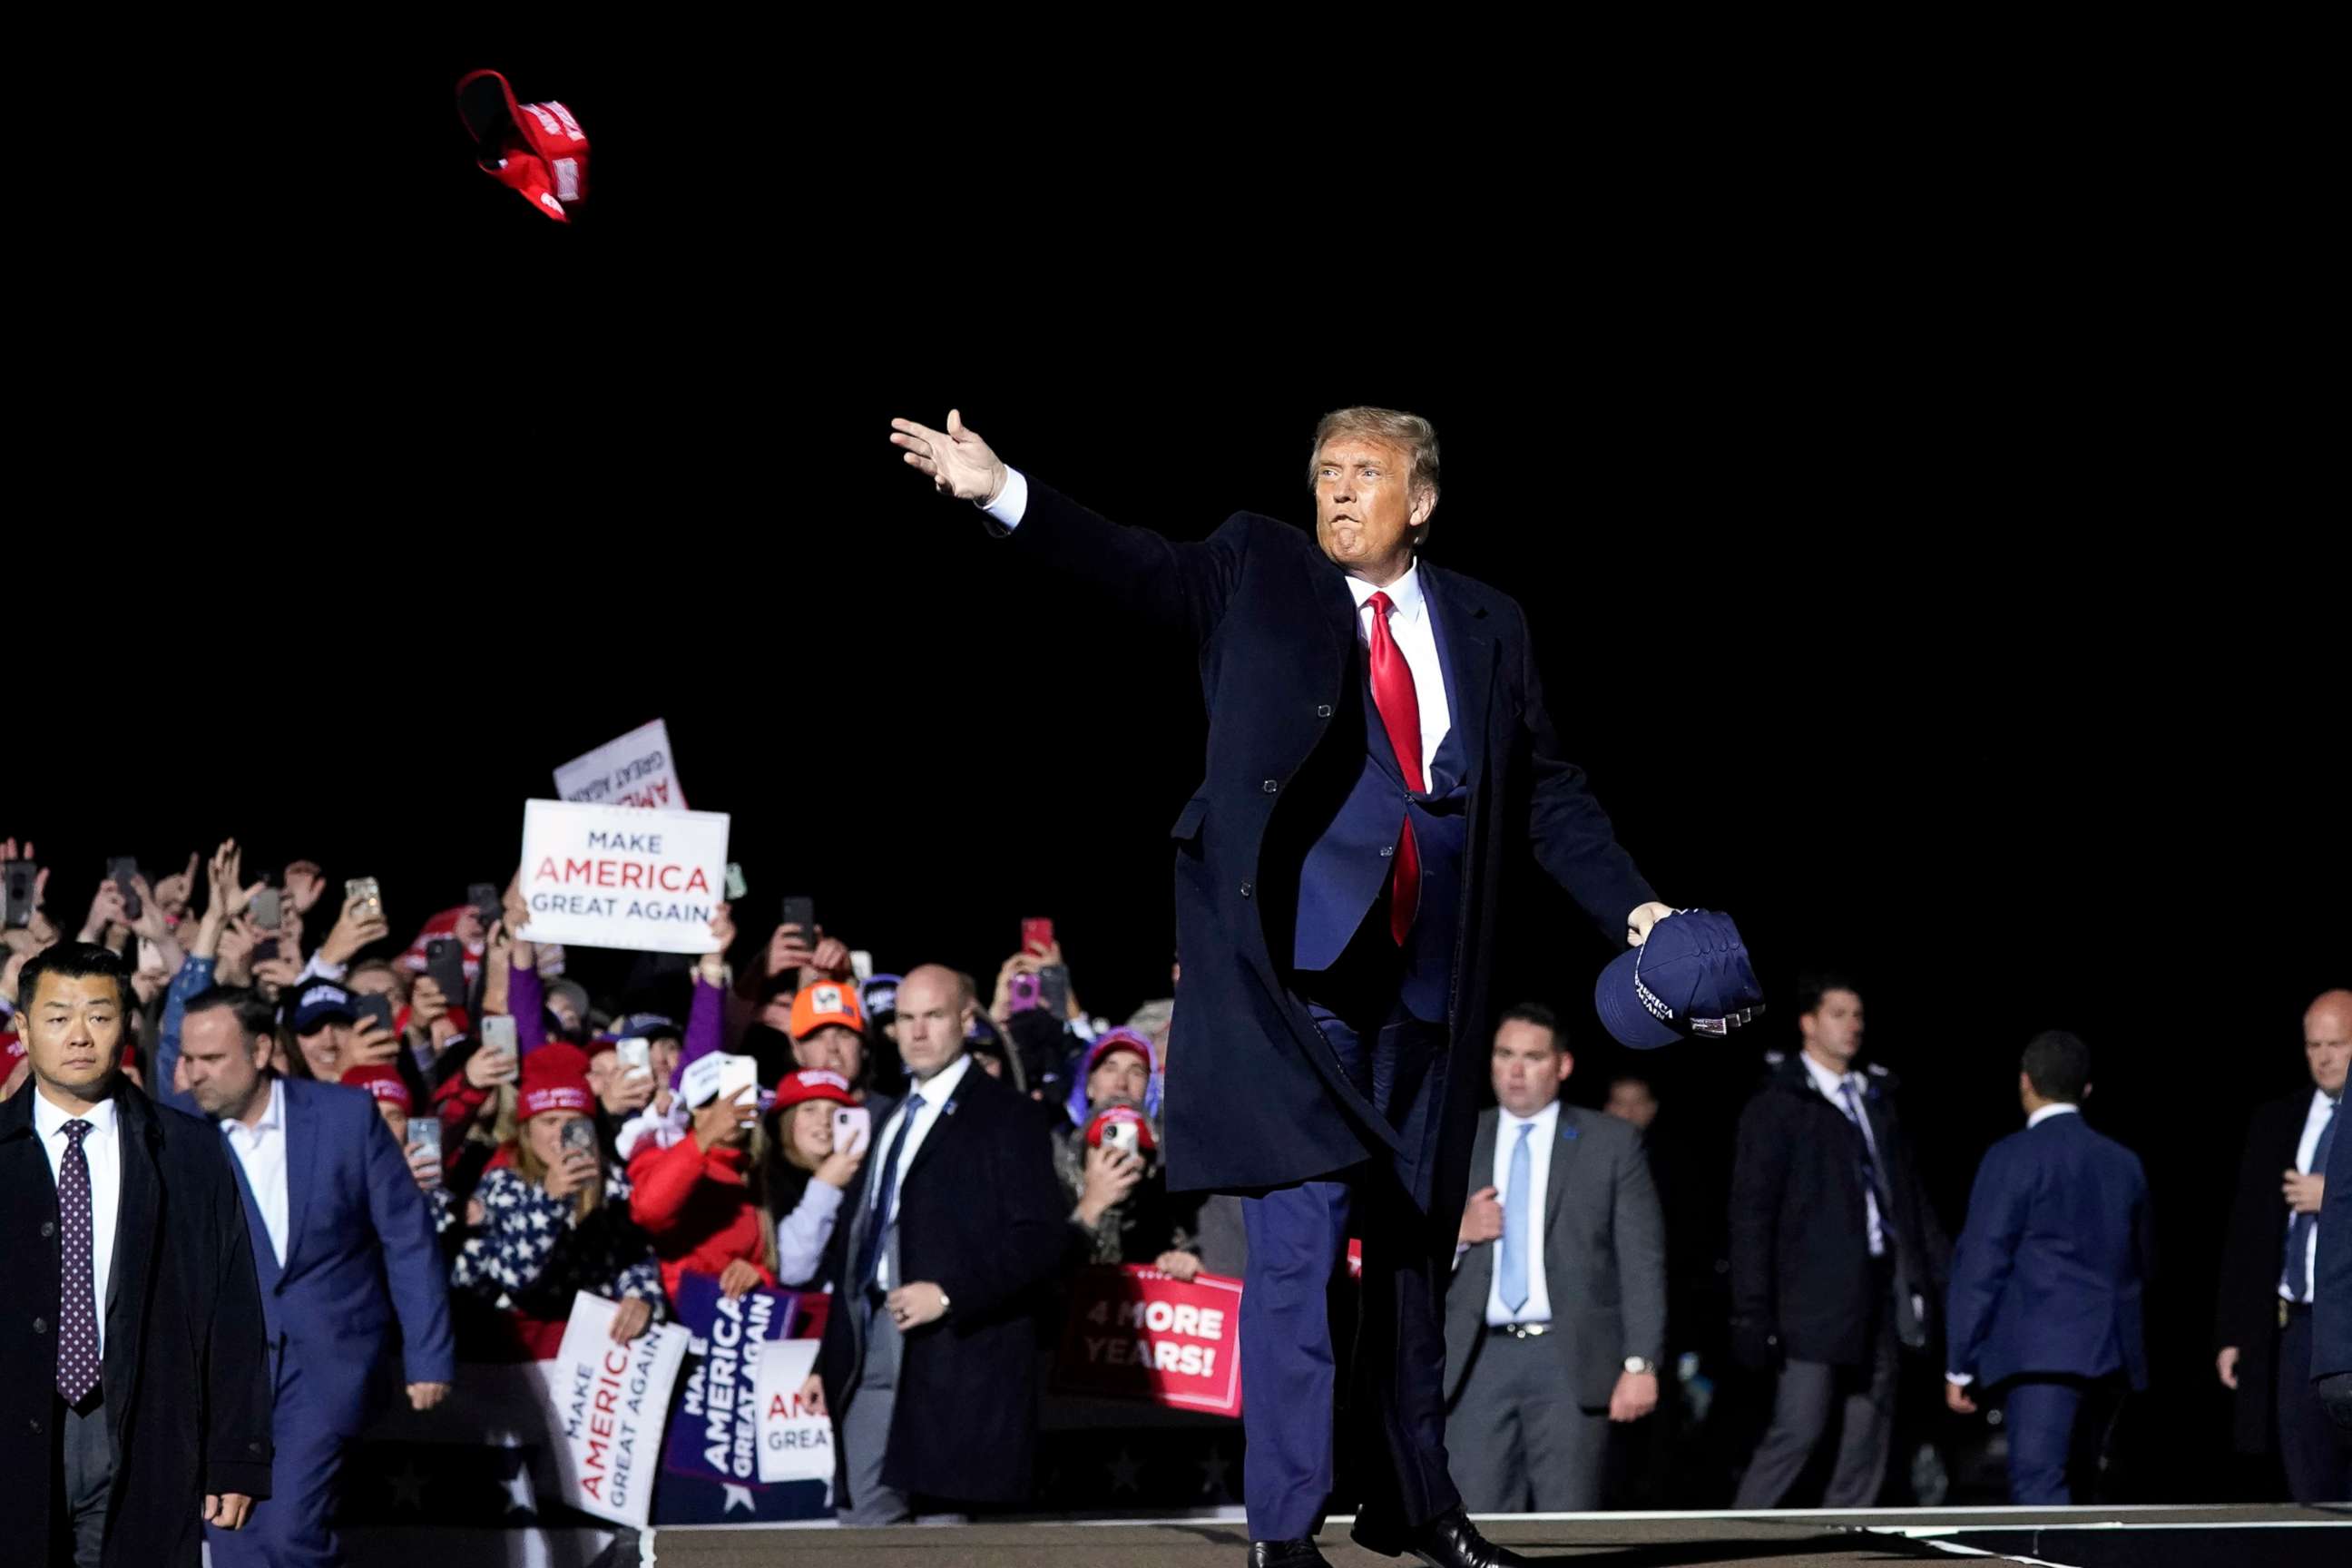 PHOTO: President Donald Trump throws hats to supporters after speaking at a campaign rally at Duluth International Airport, Sept. 30, 2020, in Duluth, Minn.